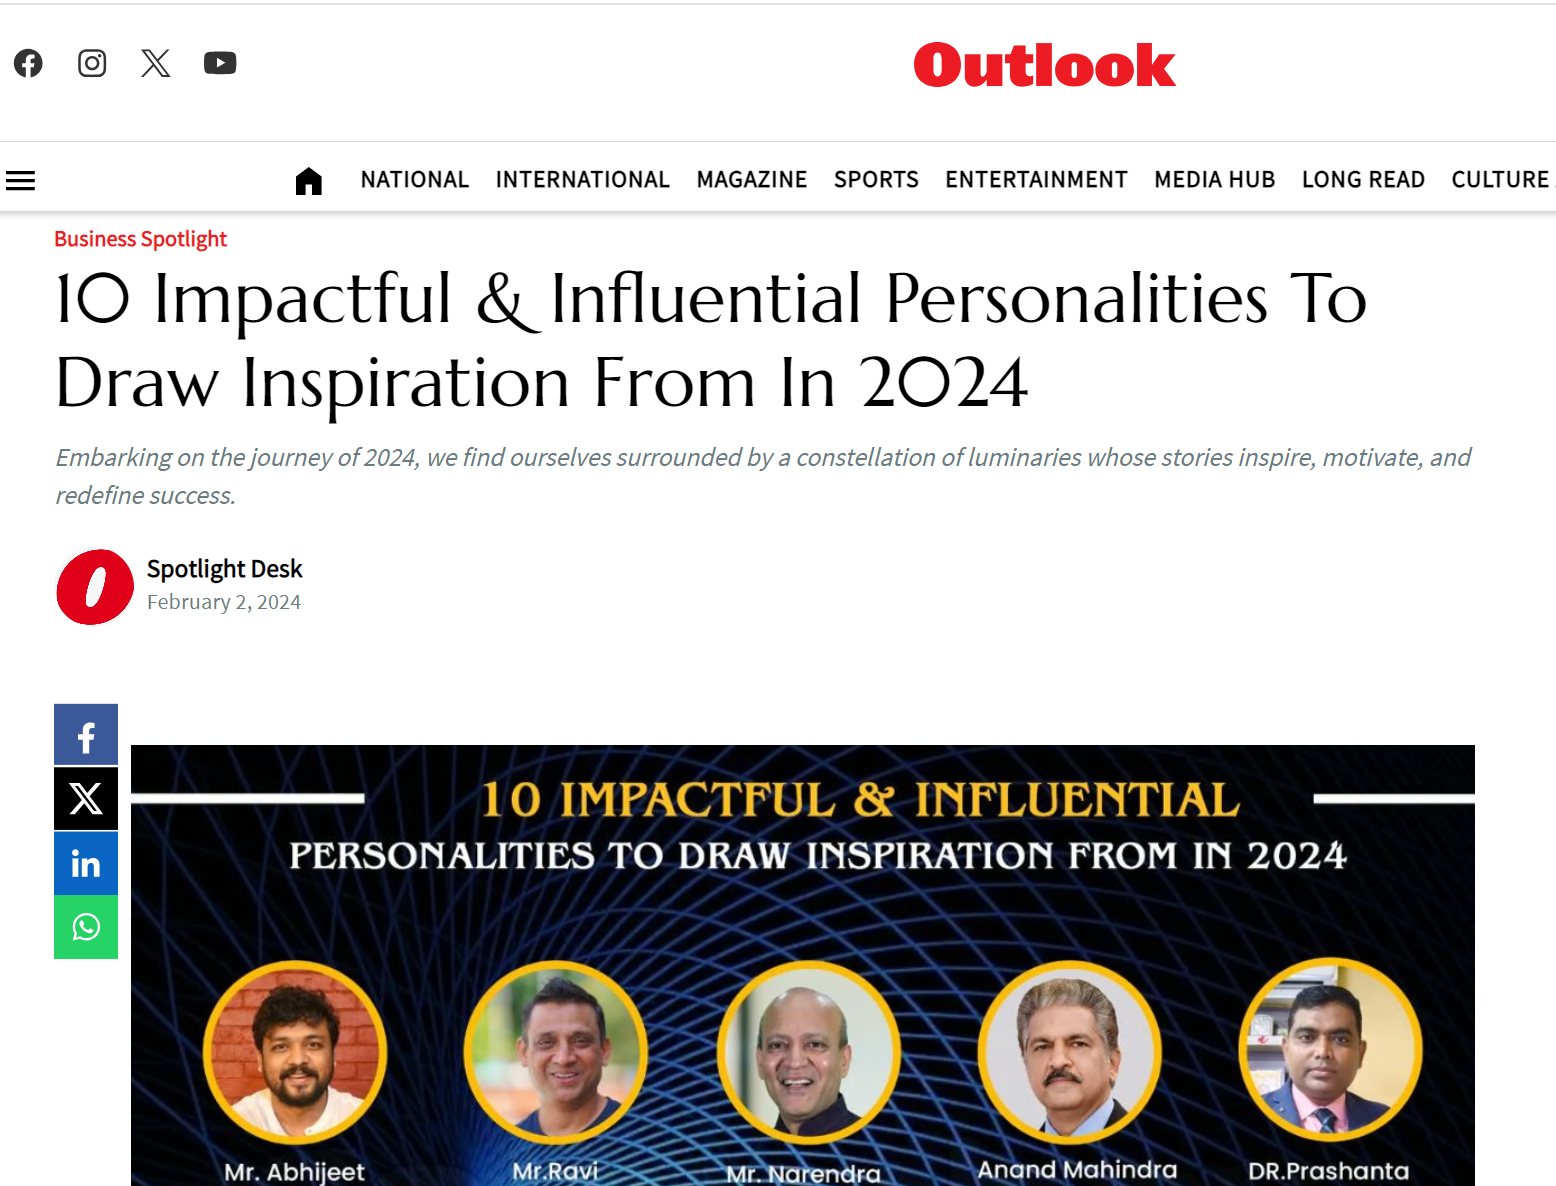 Ravi Kaklasaria edForce CEO is one of the 10 Impactful & Influential Personalities To Draw Inspiration From In 2024Ravi Kaklasaria edForce CEO is one of the 10 Impactful & Influential Personalities To Draw Inspiration From In 2024